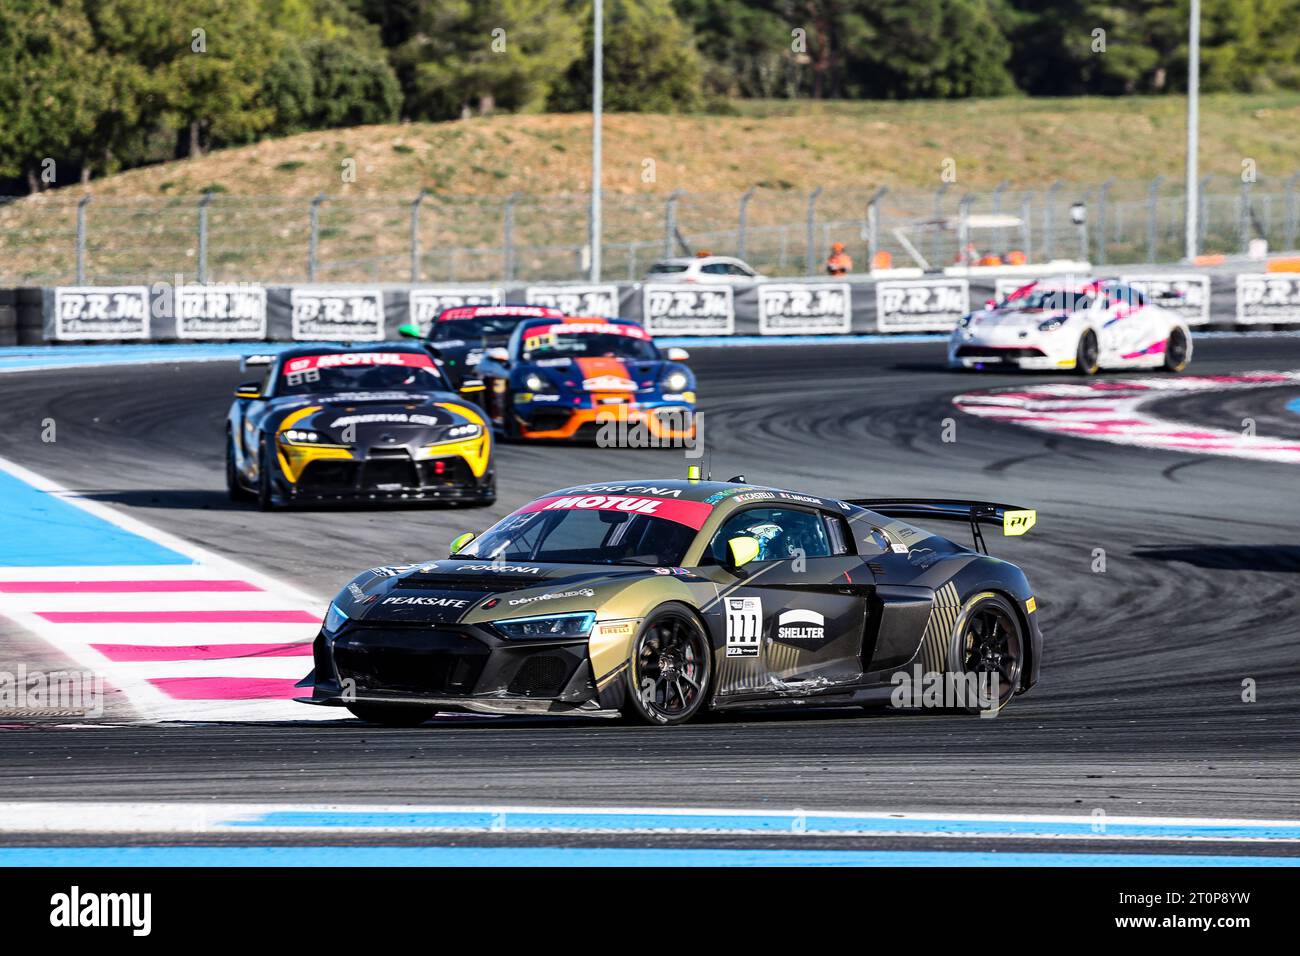 Le Castellet, France. 08th Oct, 2023. 111 CASTELLI Gael FRA, MALOIGNE Edgar TBC, CSA RACING, Audi R8 LMS GT4, PRO-AM, during the 6th round of the Championnat de France FFSA GT - GT4 France 2023, from October 6 to 8, 2023 on the Circuit de Paul Ricard, in Le Castellet, France - Photo Grégory Lenormand/DPPI Credit: DPPI Media/Alamy Live News Credit: DPPI Media/Alamy Live News Stock Photo